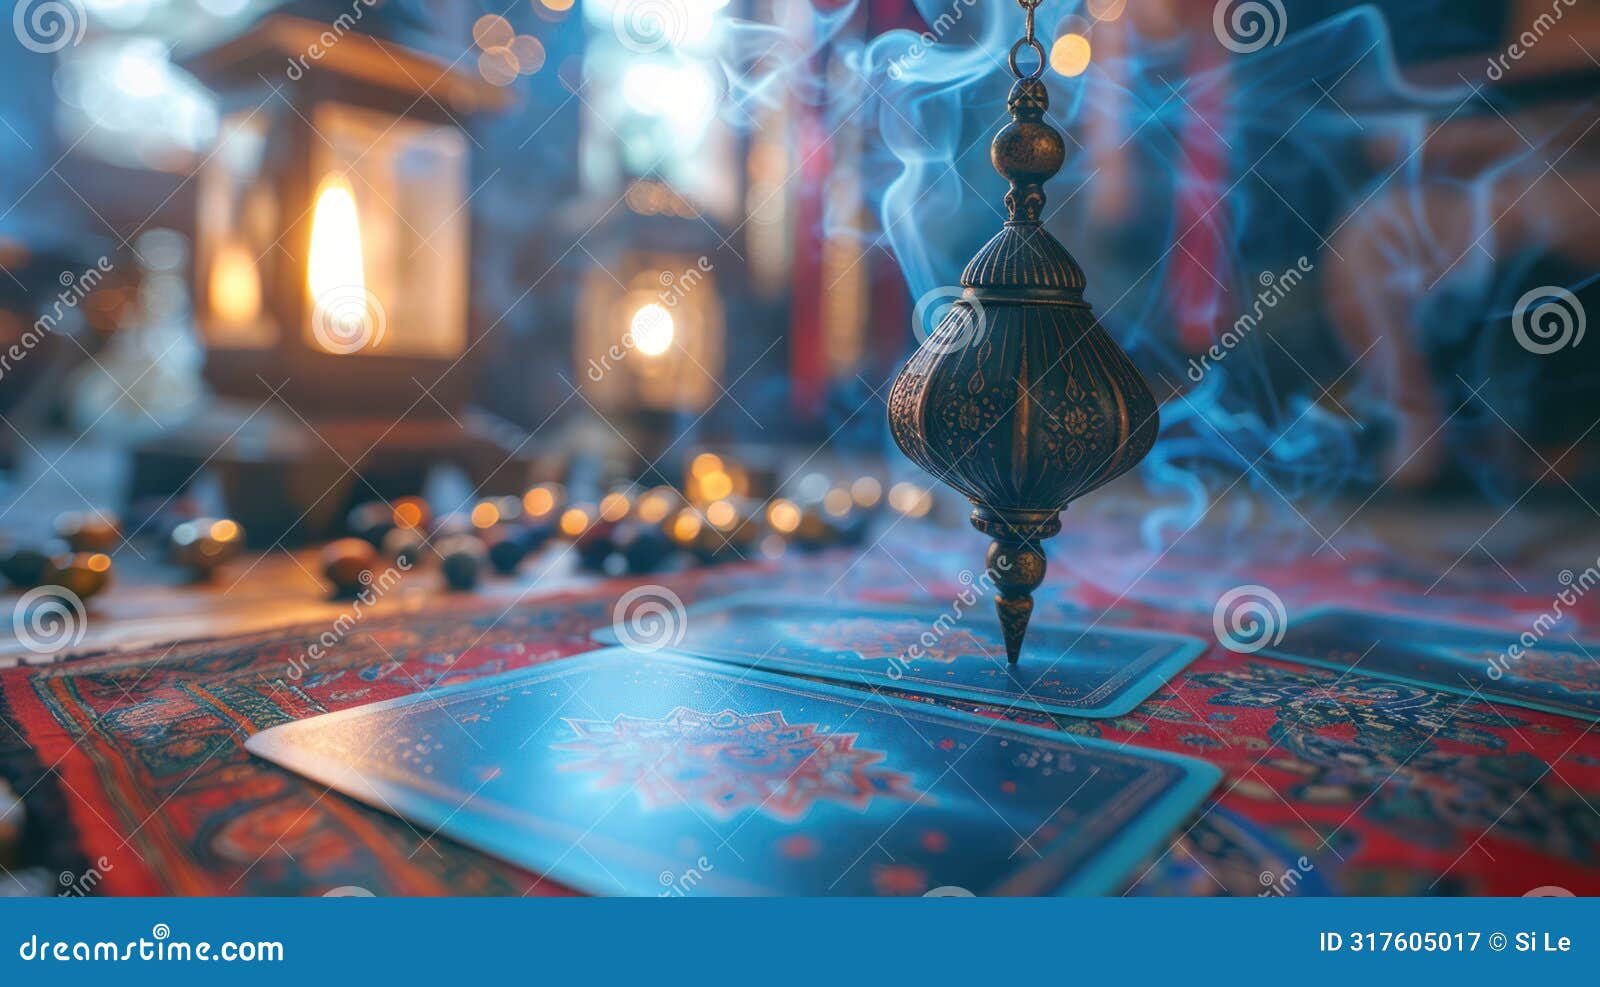 divination tools: cartomancy pendulum on blurred altar with defocused tarot cards and smoke